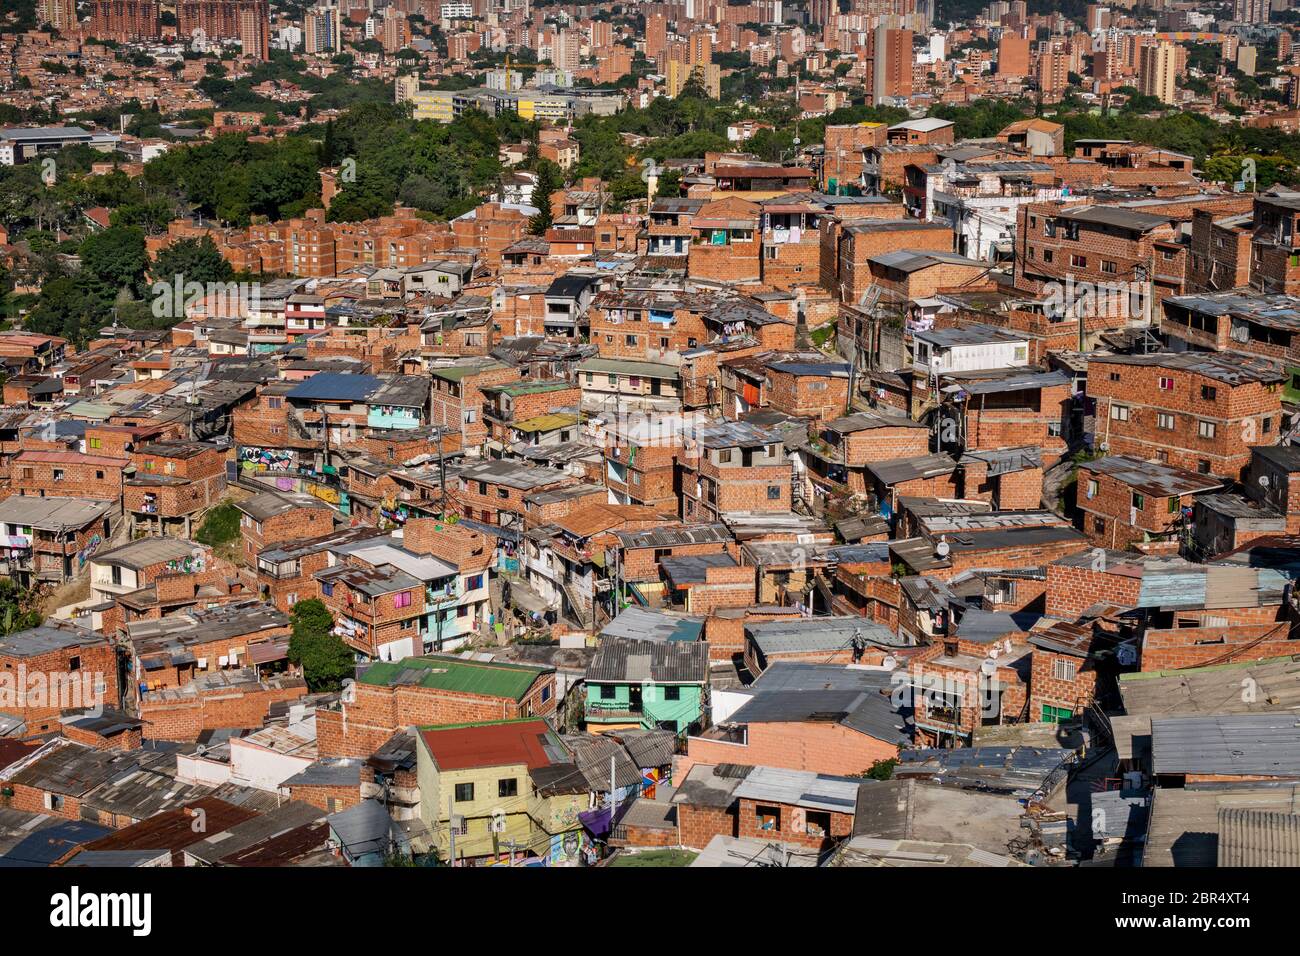 Medellin - Colombia - 11. January 2020: View of a poor neighborhood in the hills above Medellin, Colombia Stock Photo